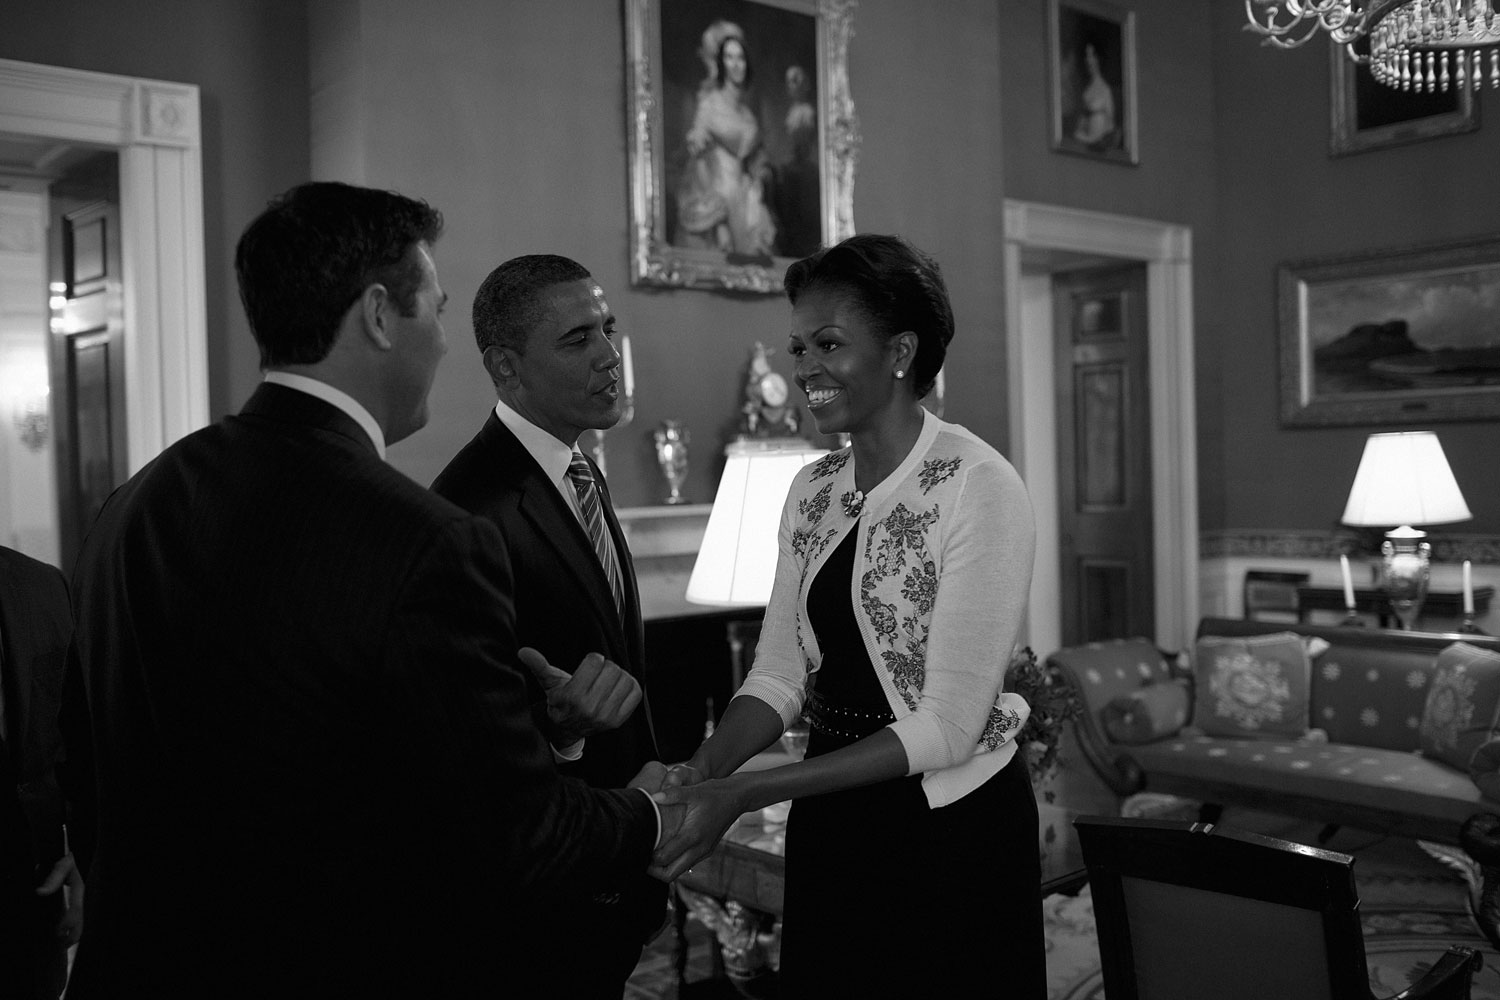 Janauary 17, 2012. Michelle Obama greets a St. Louis Cardinal team player in the Red Room.